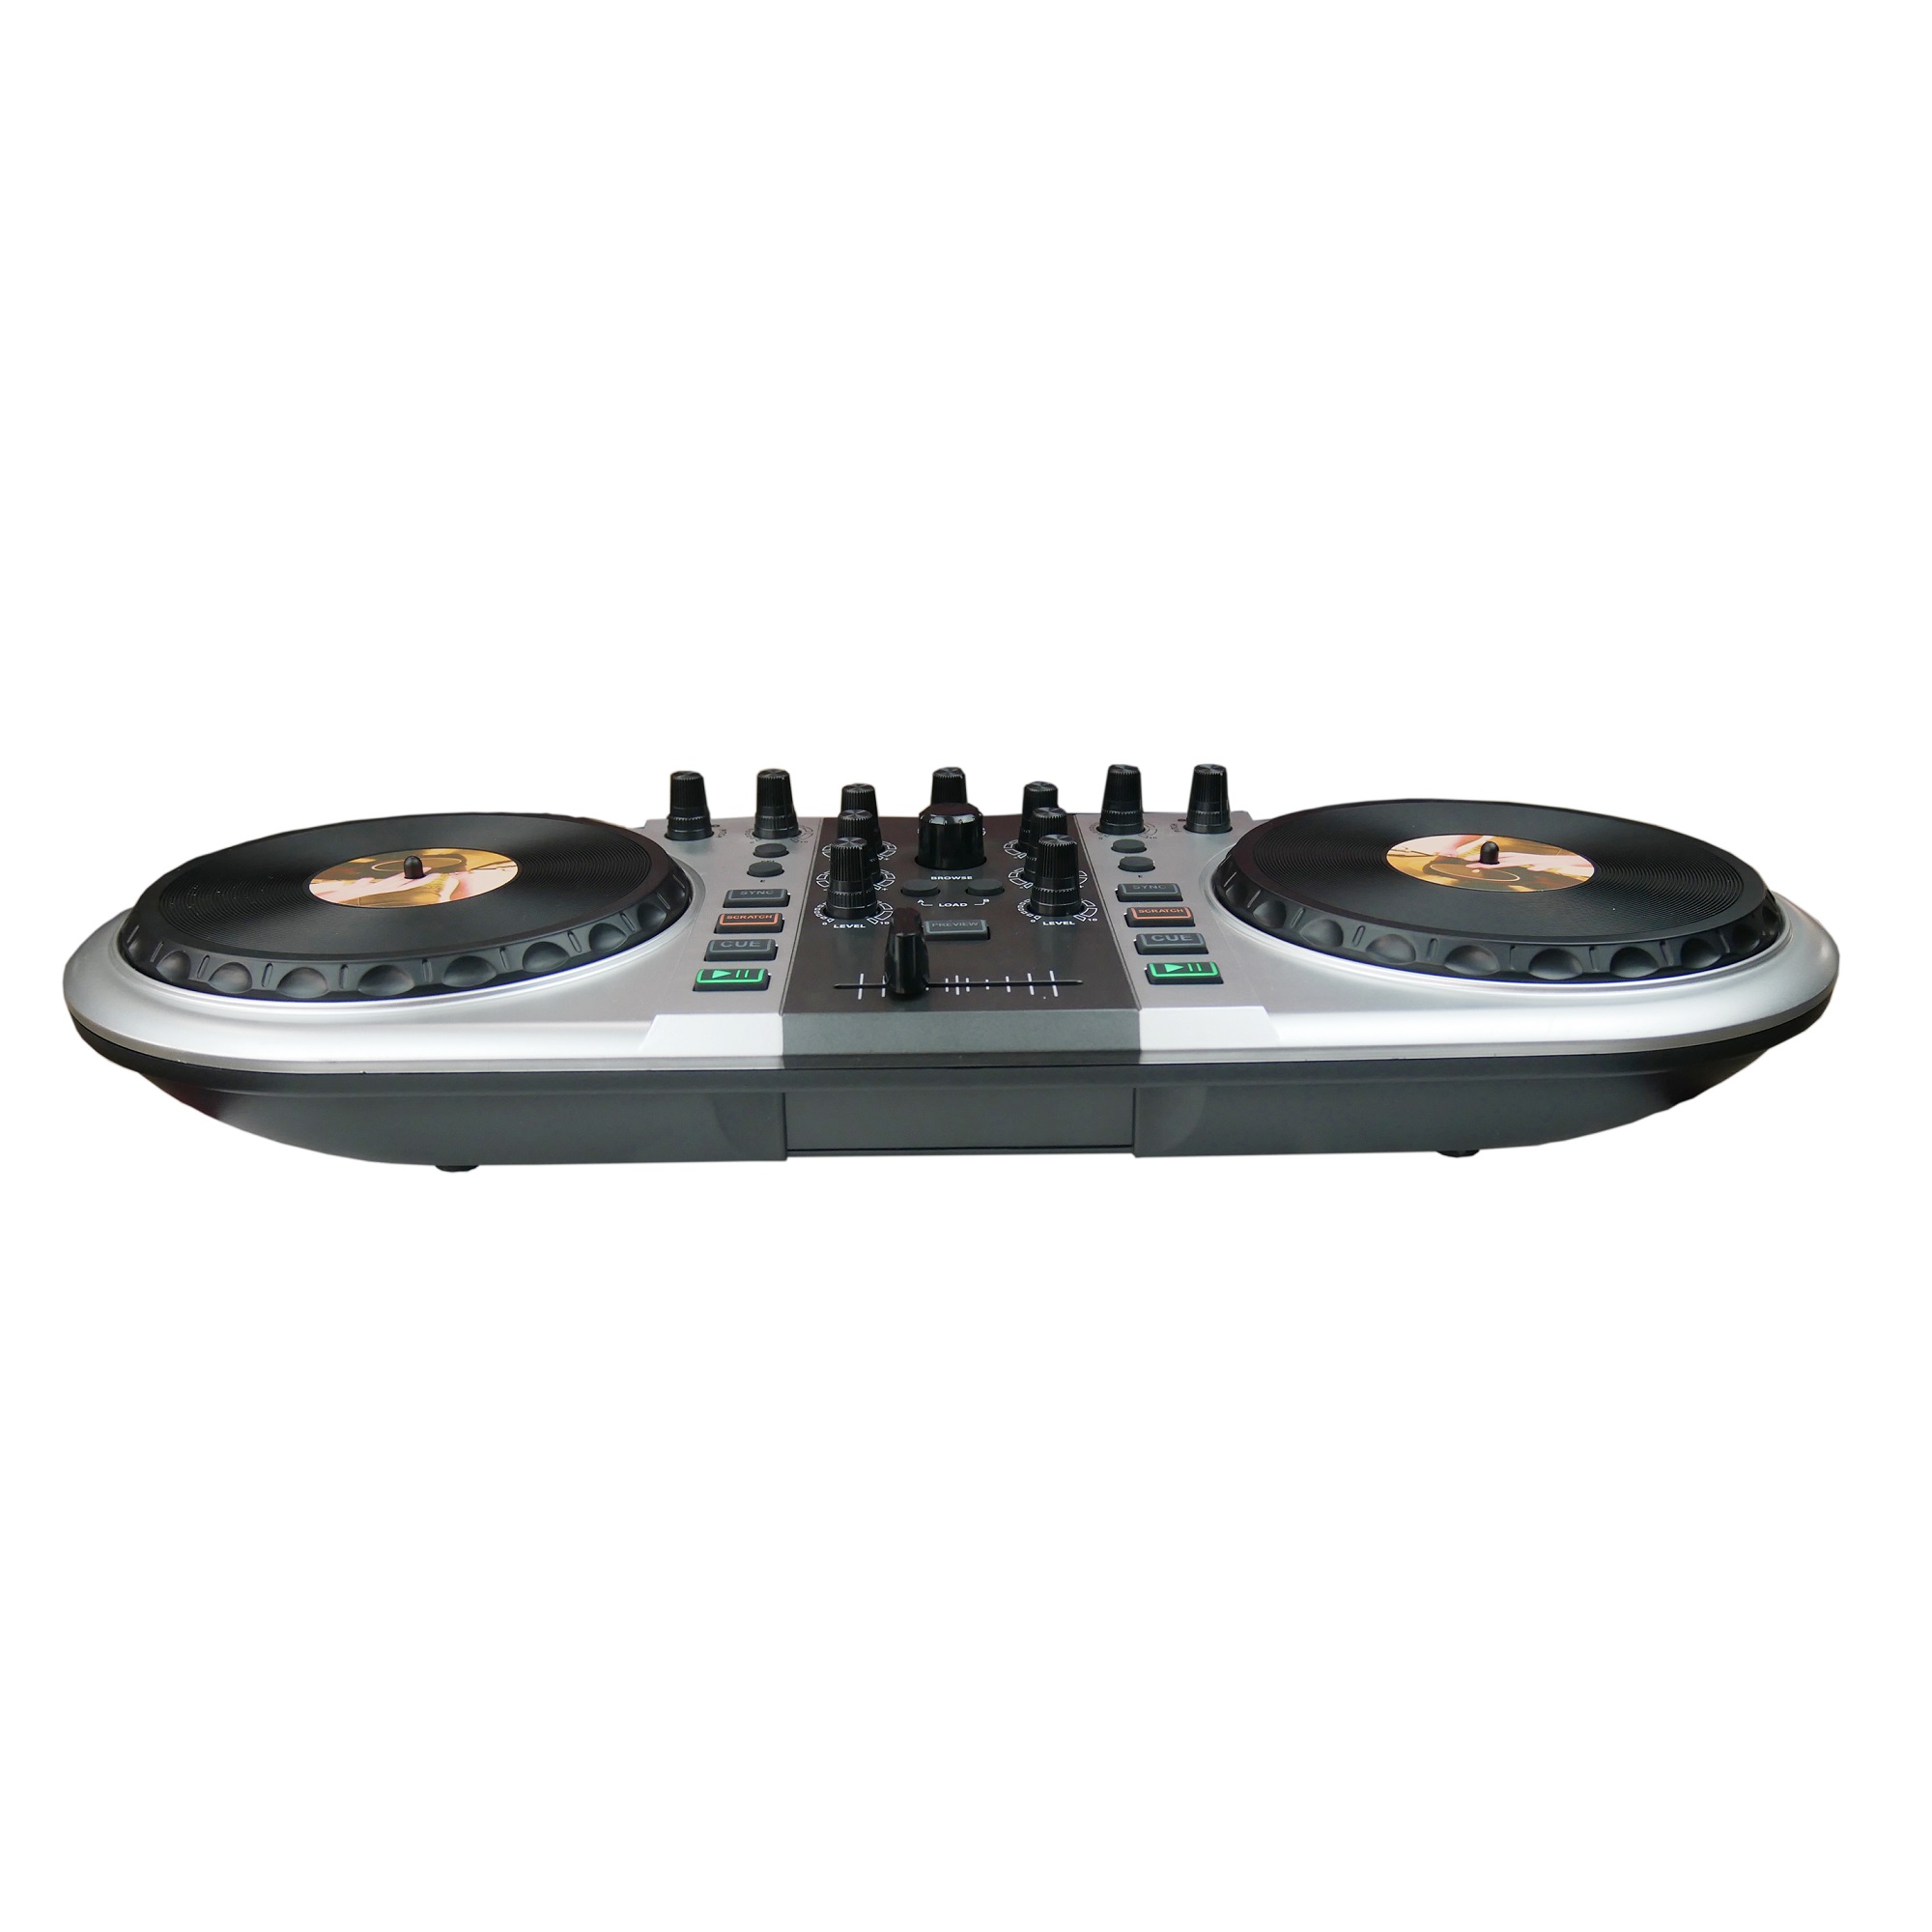 MIDI-1 Midi Controller for DJ parties, events and clubs